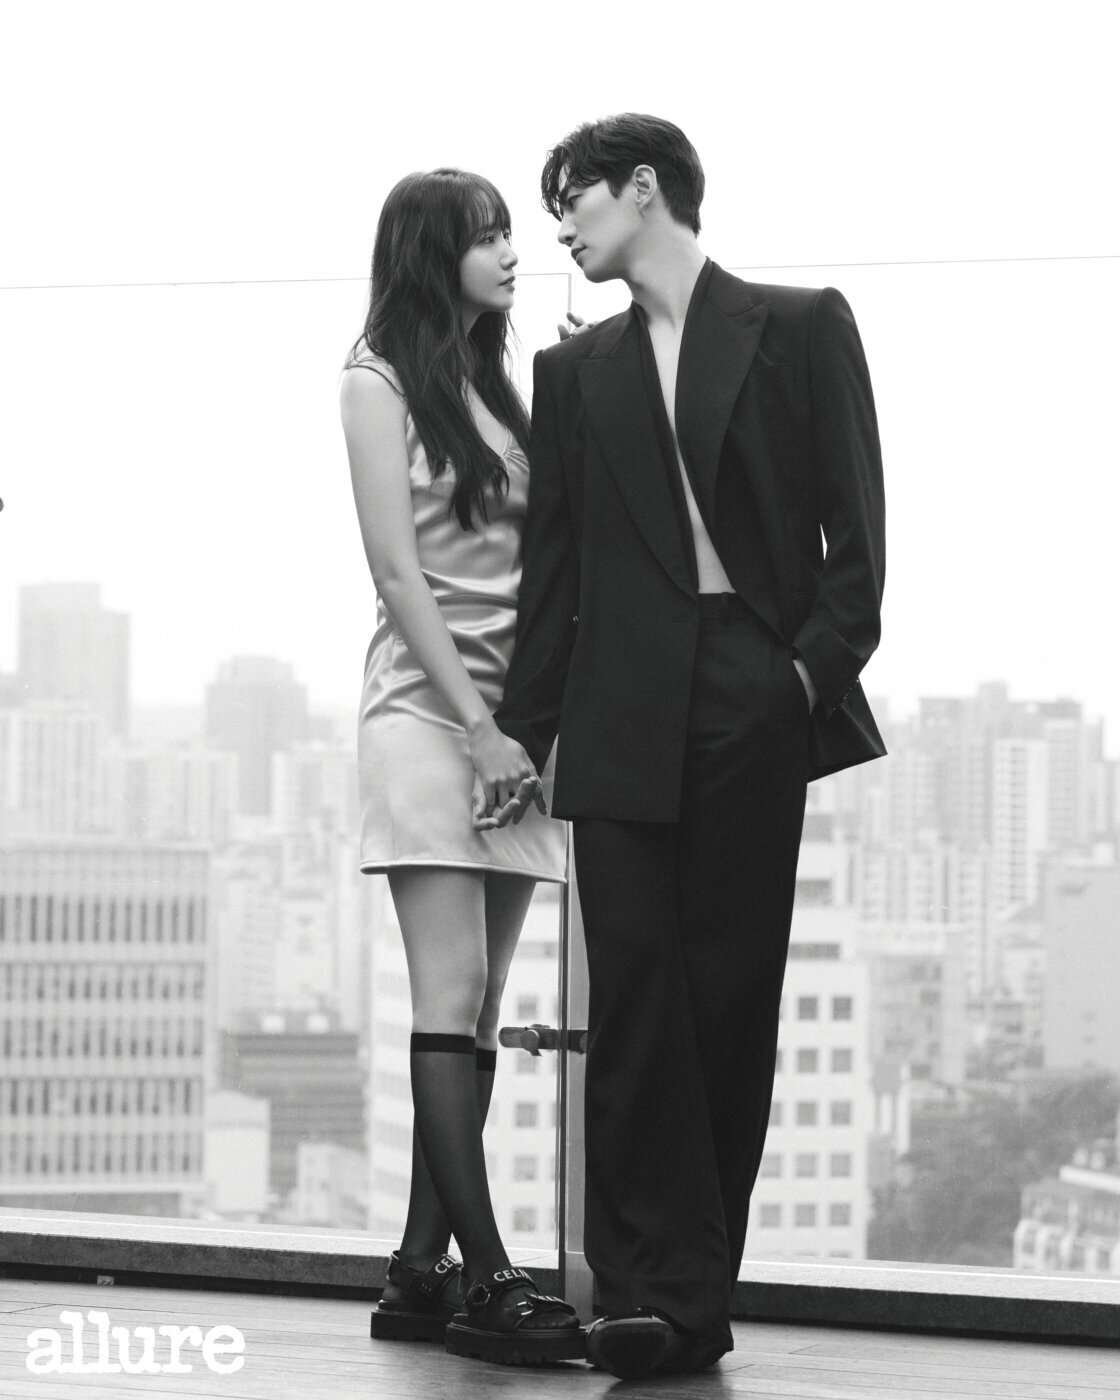 YoonA and Junho for Allure Korea July 2023 Issue | kpopping